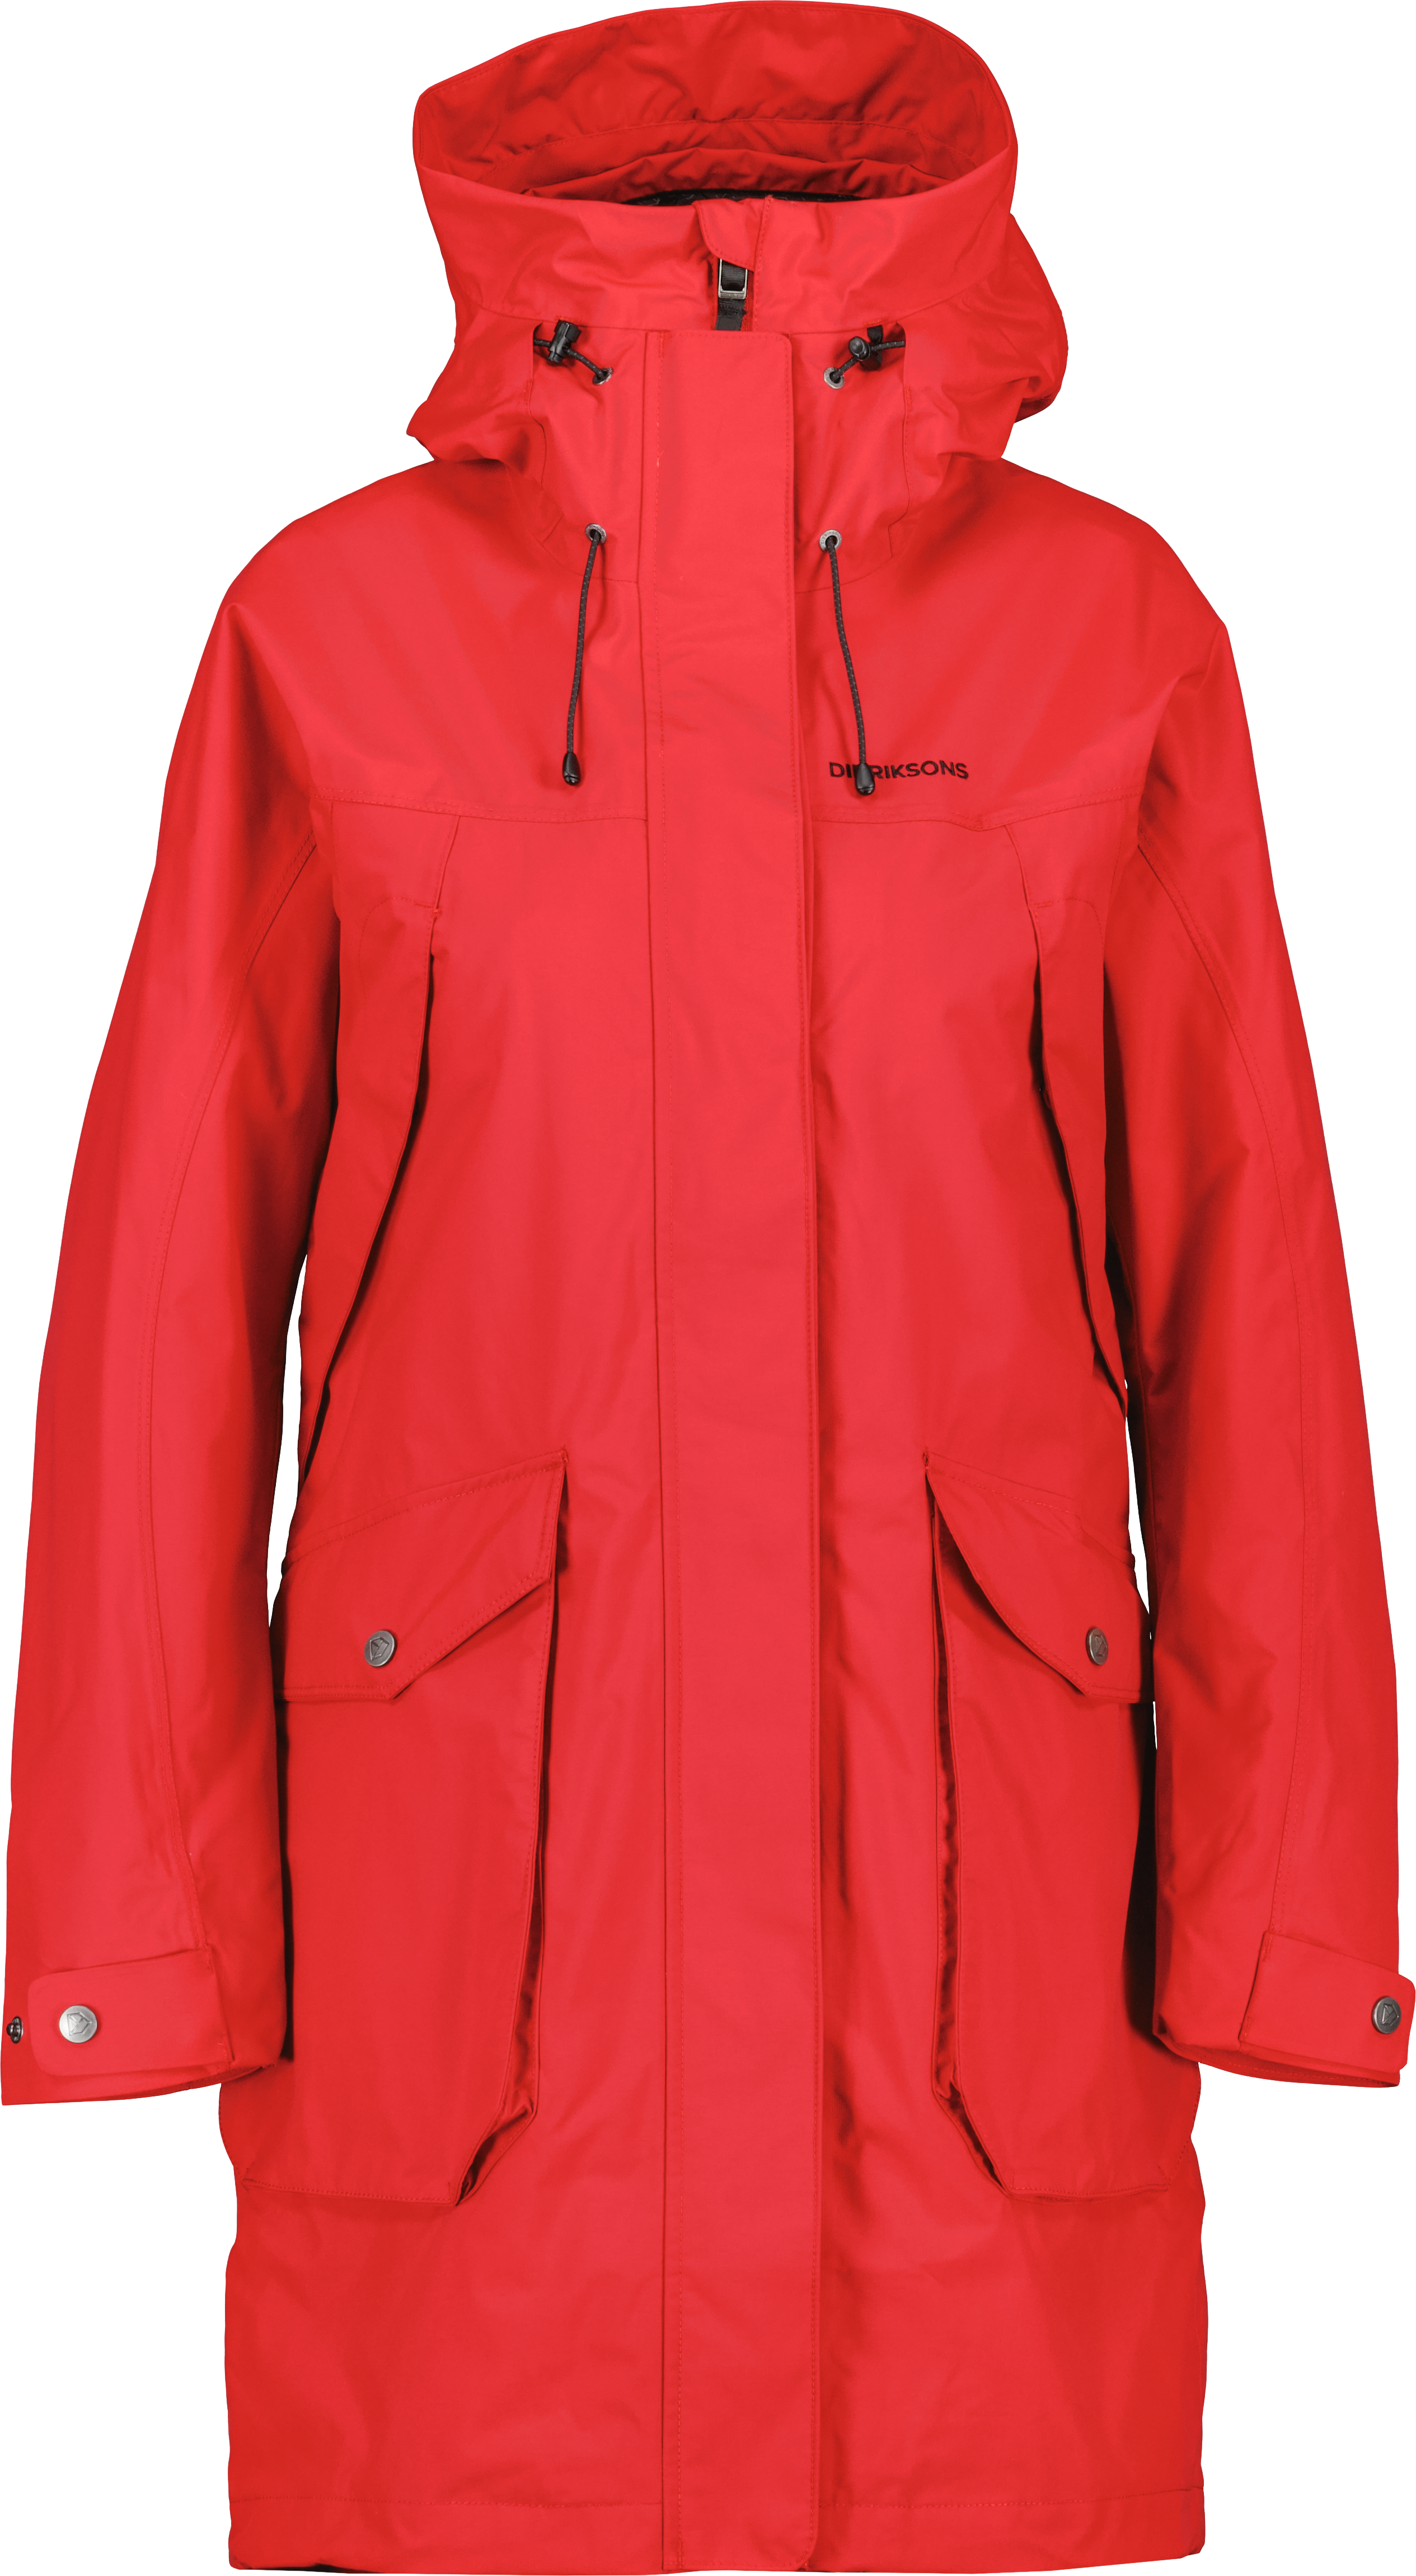 Didriksons Women’s Thelma Parka 10 Pomme Red